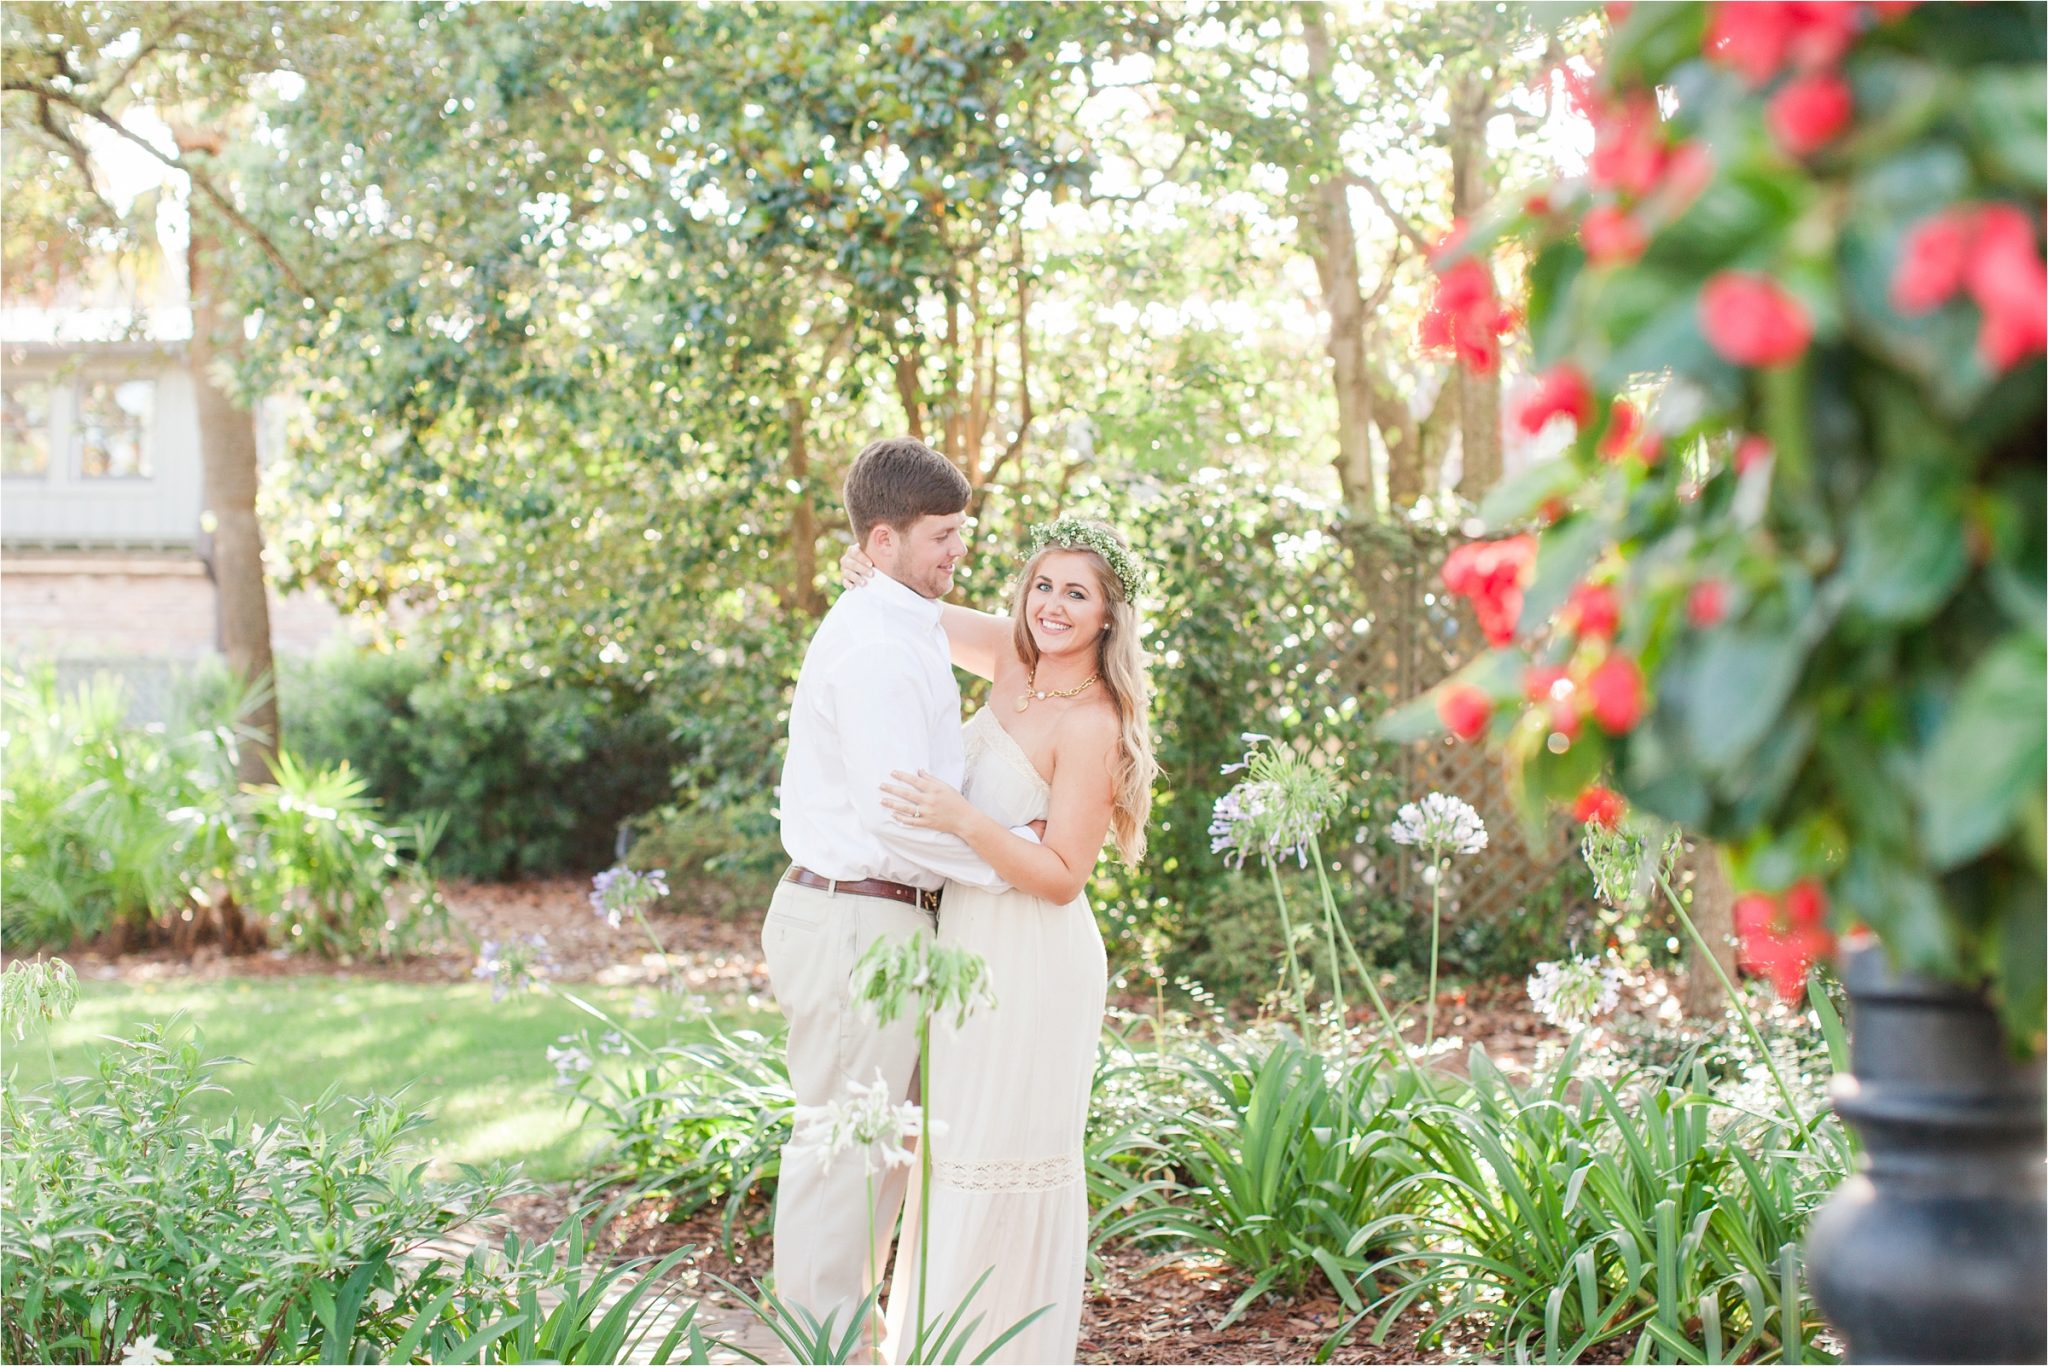 Point Clear Engagement Session at the Grand Hotel-Mary Catherine + Chase-Whimsical engagement shoot-Neutral engagement shoot